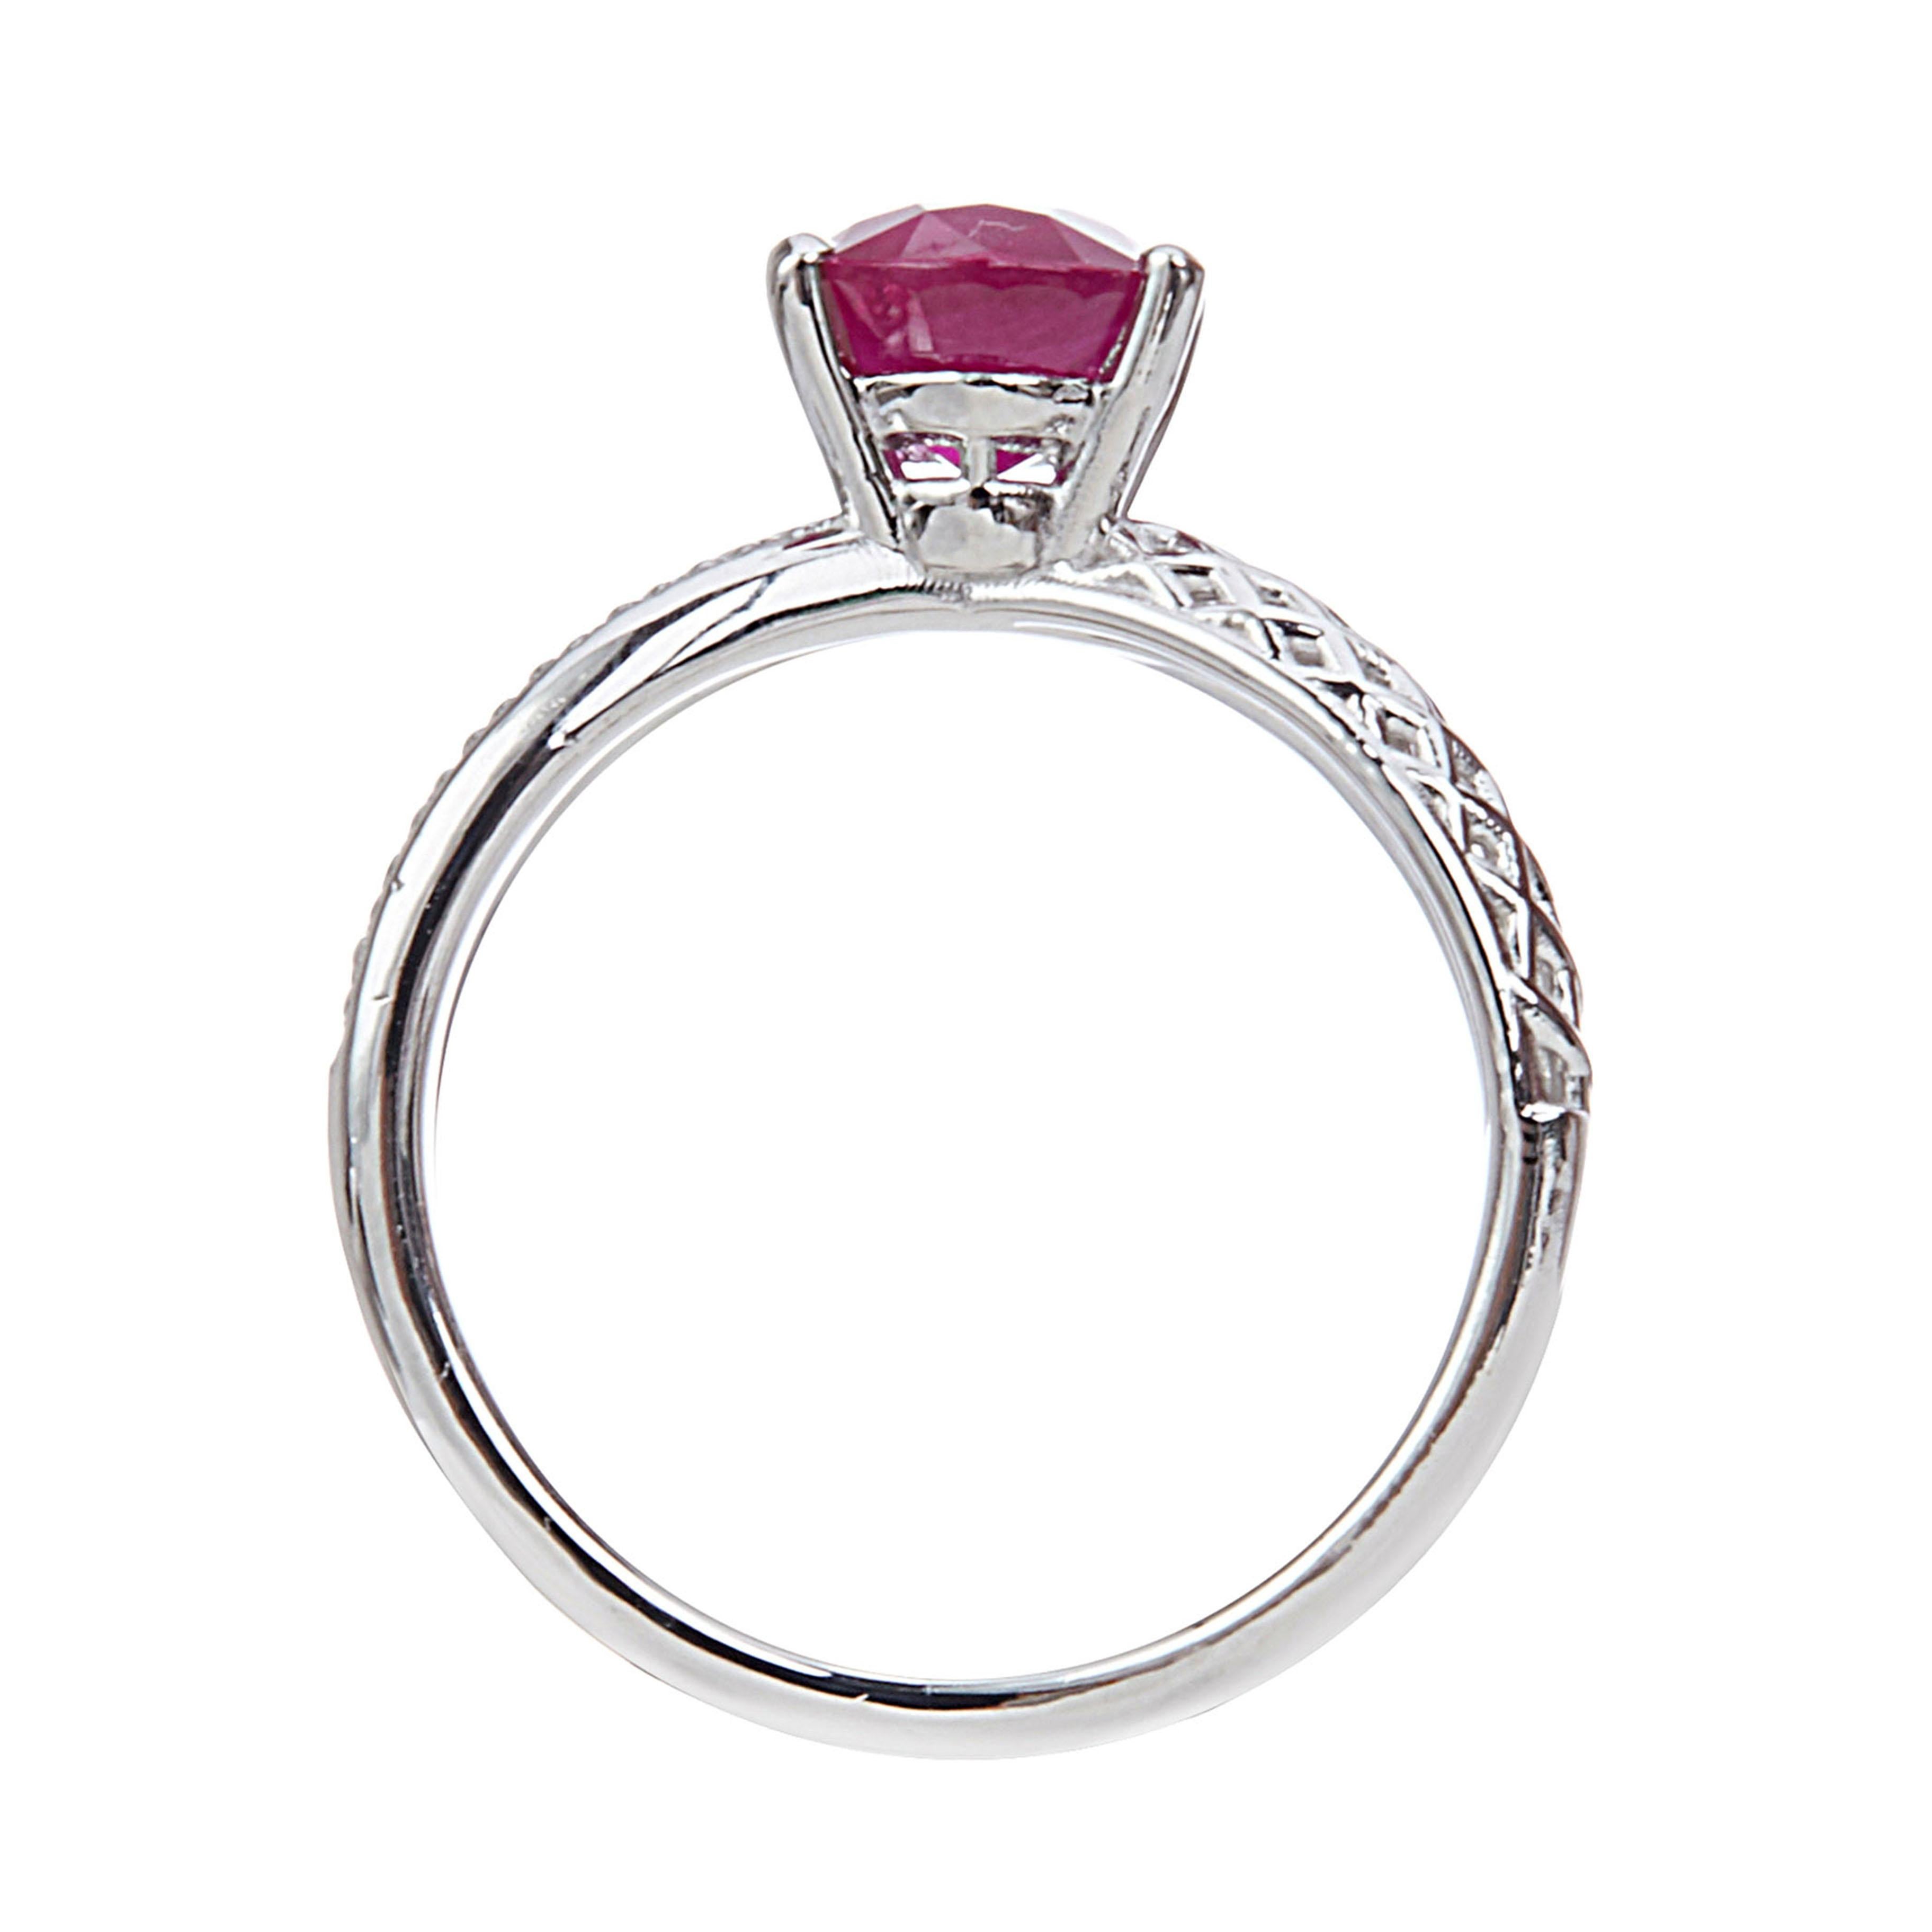 Contemporary Yemyungji Burma Ruby Oval Cut 2.37ct Diamond 18 Karat White Gold Solitaire Ring For Sale